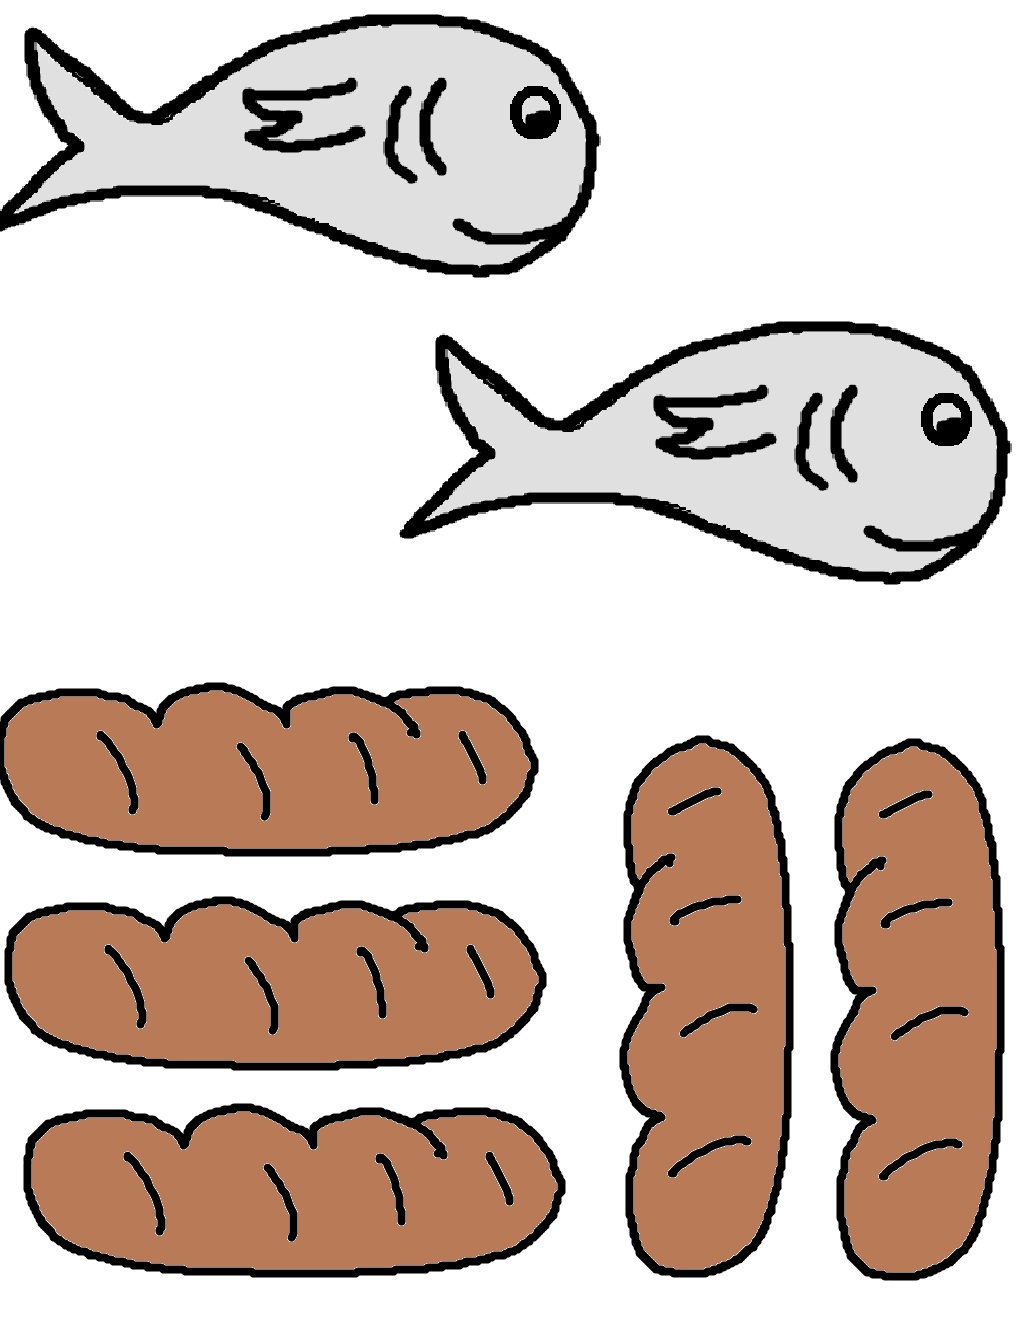 1000+ images about Loaves & Fishes